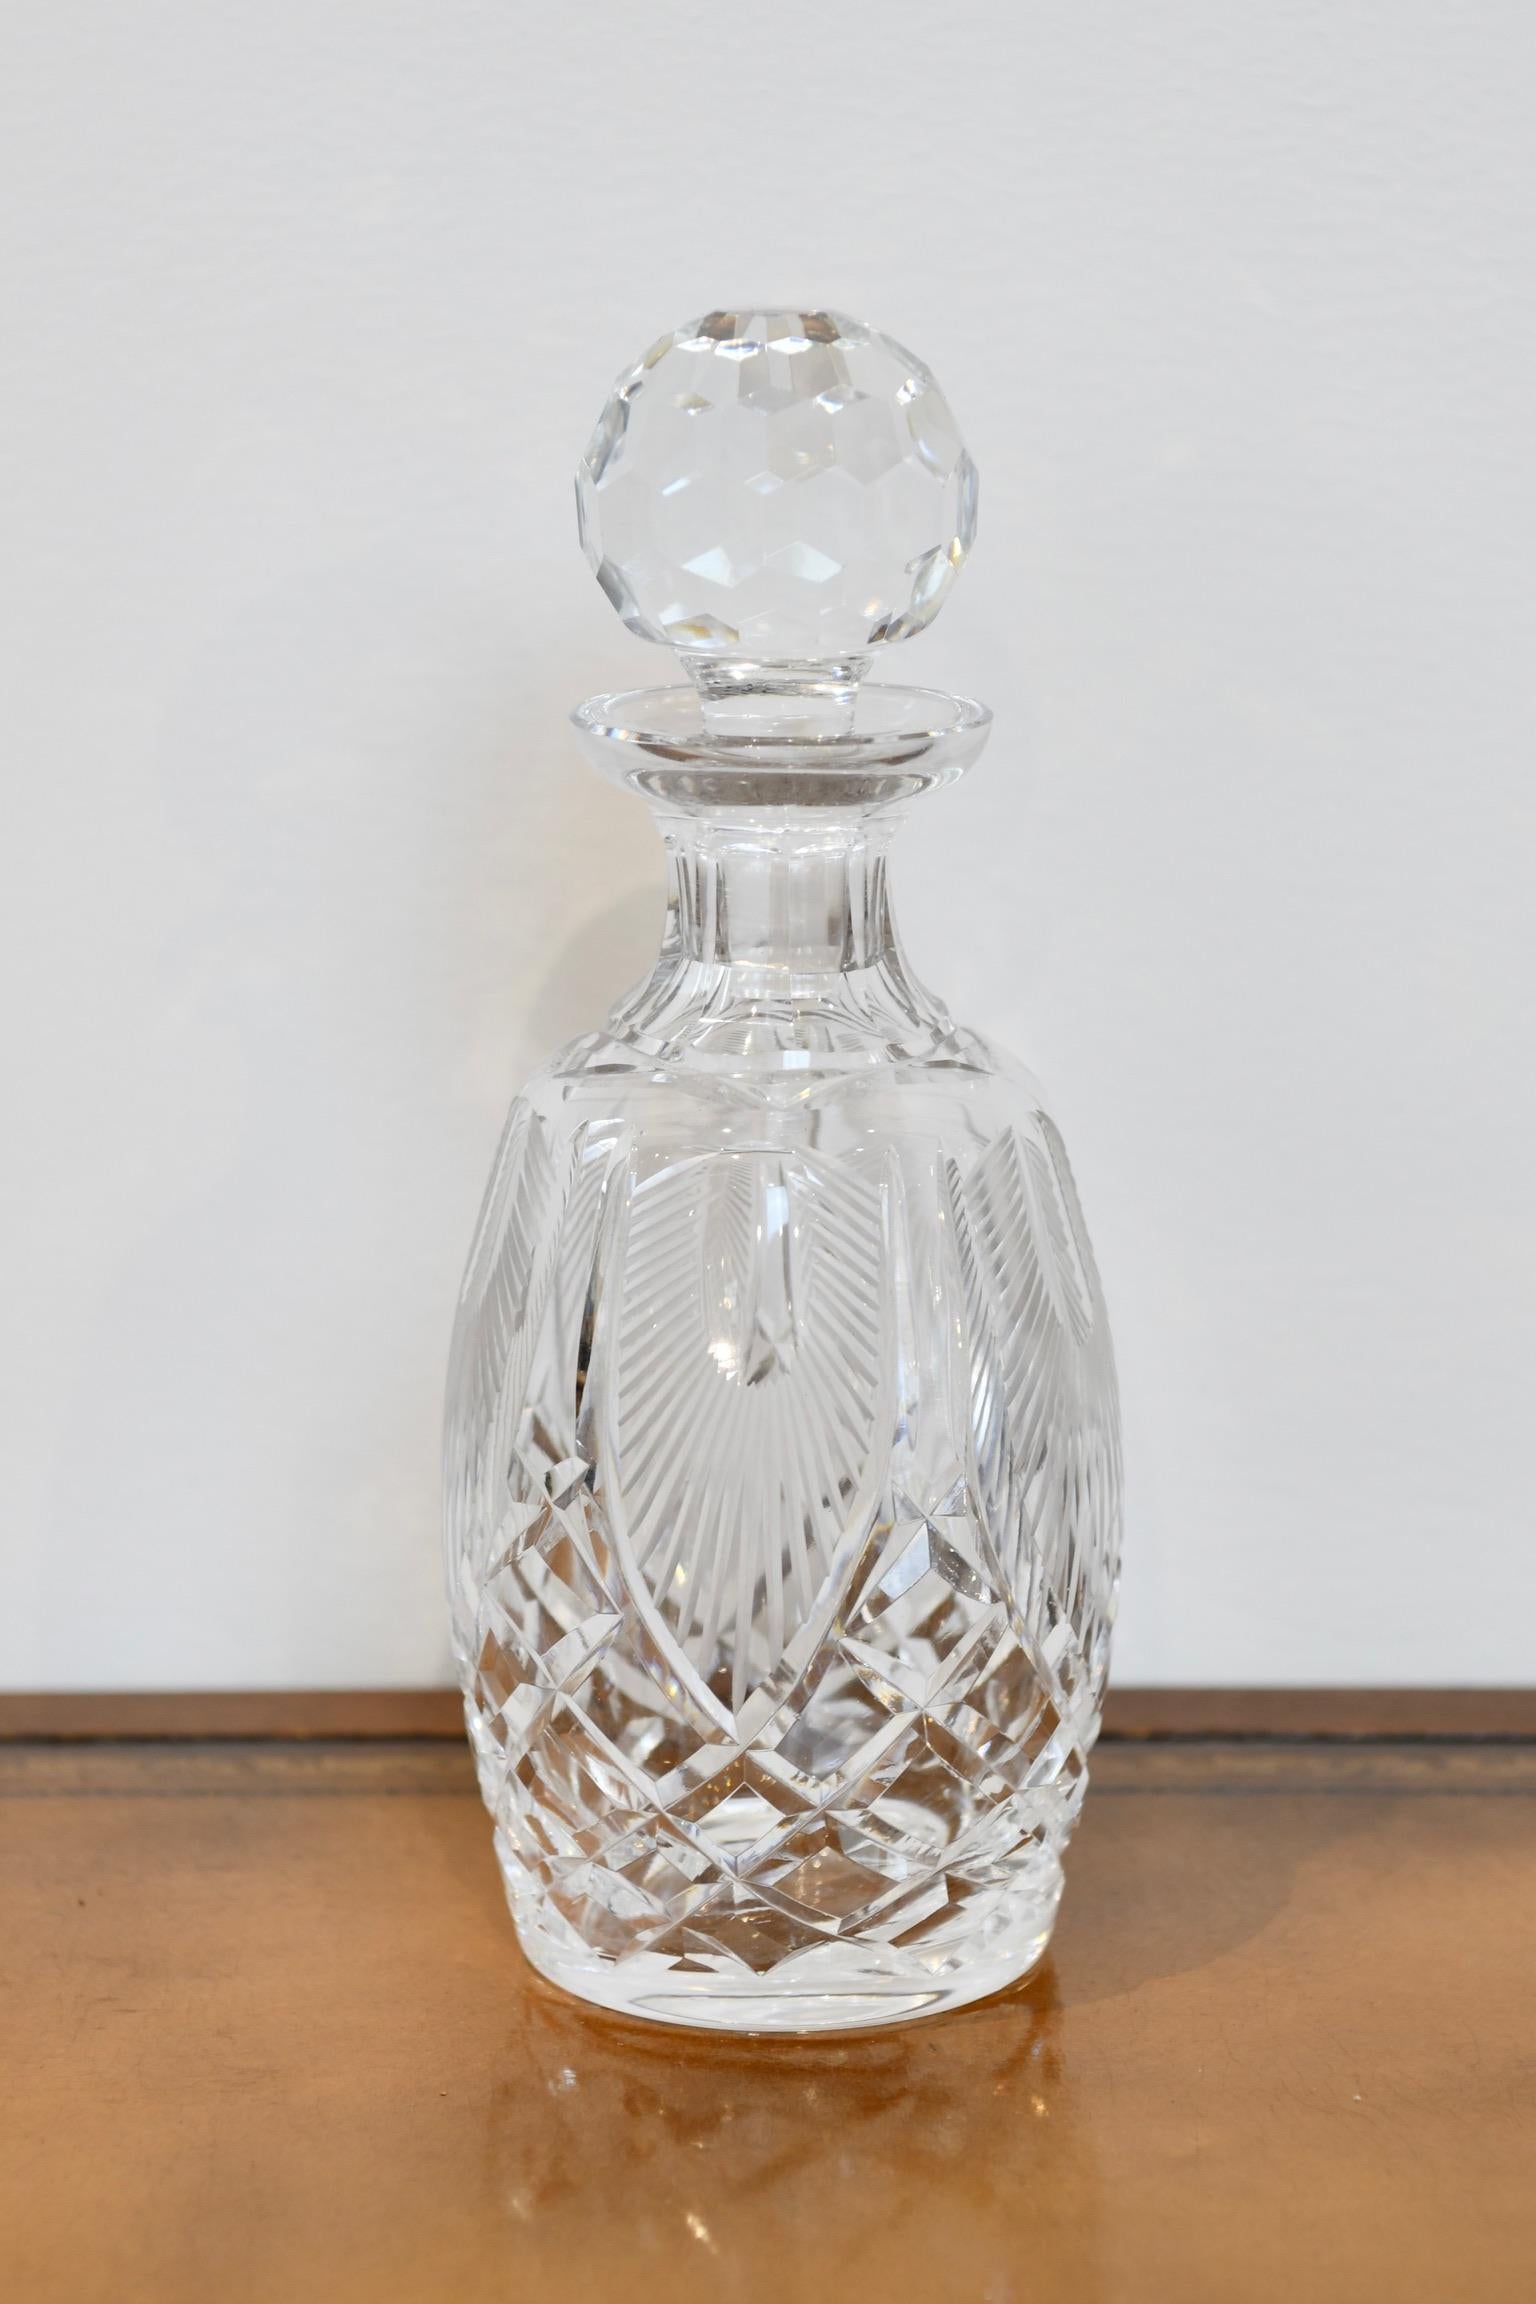 Waterford crystal decanter. Dimensions: 10.5